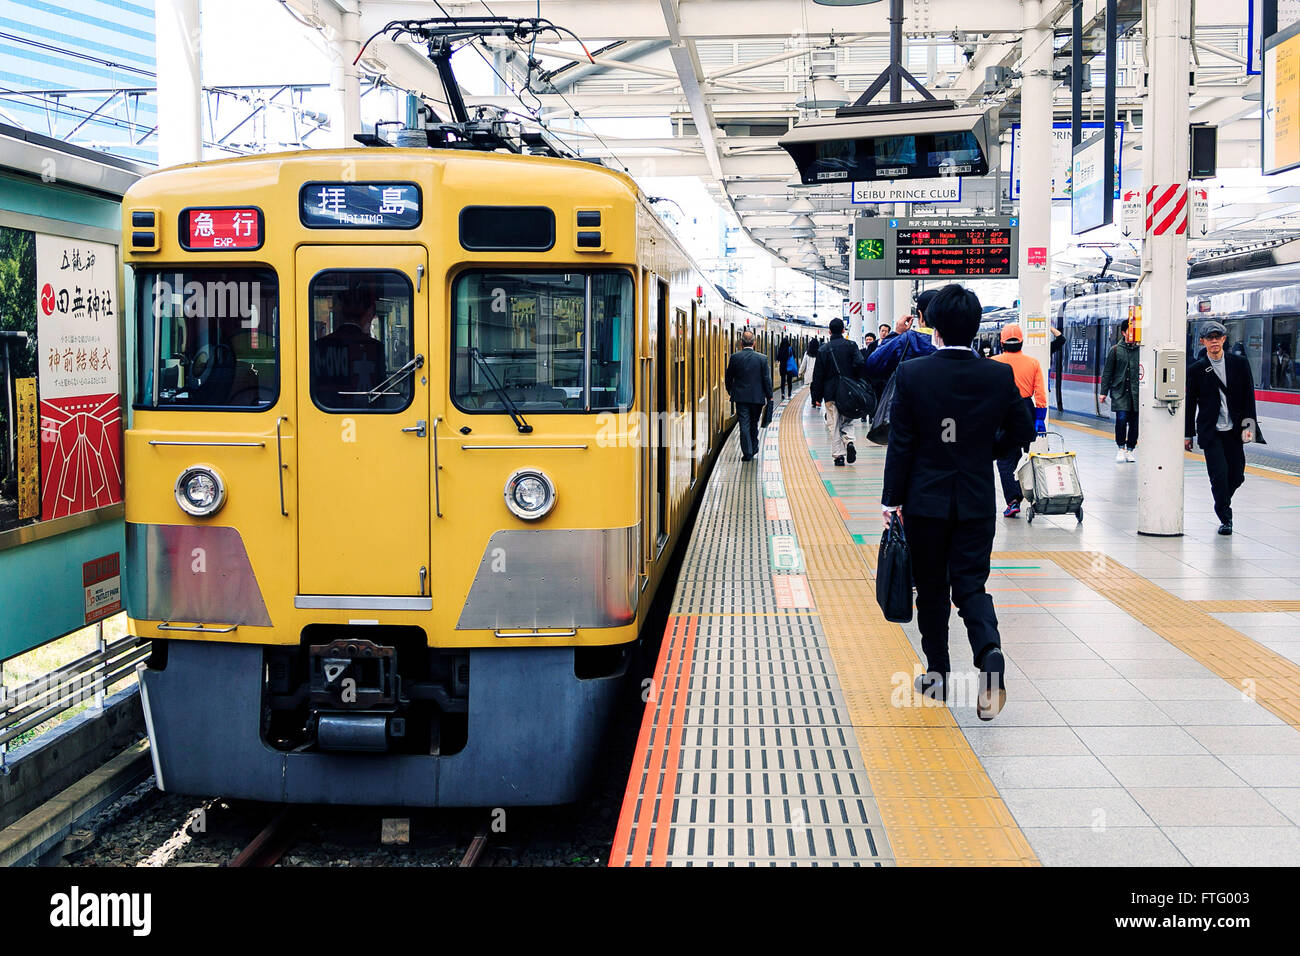 A yellow Seibu train arrives at Seibu-Shinjuku station on March 29, 2016, Tokyo, Japan. Seibu Railway corporation announced that they will rent out entire carriages for party groups, on its Seibu Shinjuku, Ikebukuro, Hajima and Kokubunji Lines, allowing the group to choose which station to be picked up at and to be dropped off at. The special party service is aimed at alumni groups especially those that previously studied and commuted along one of the lines. In collaboration with Syoya Inc., a company specialised in organising alumni parties, the train company is taking bookings through till M Stock Photo